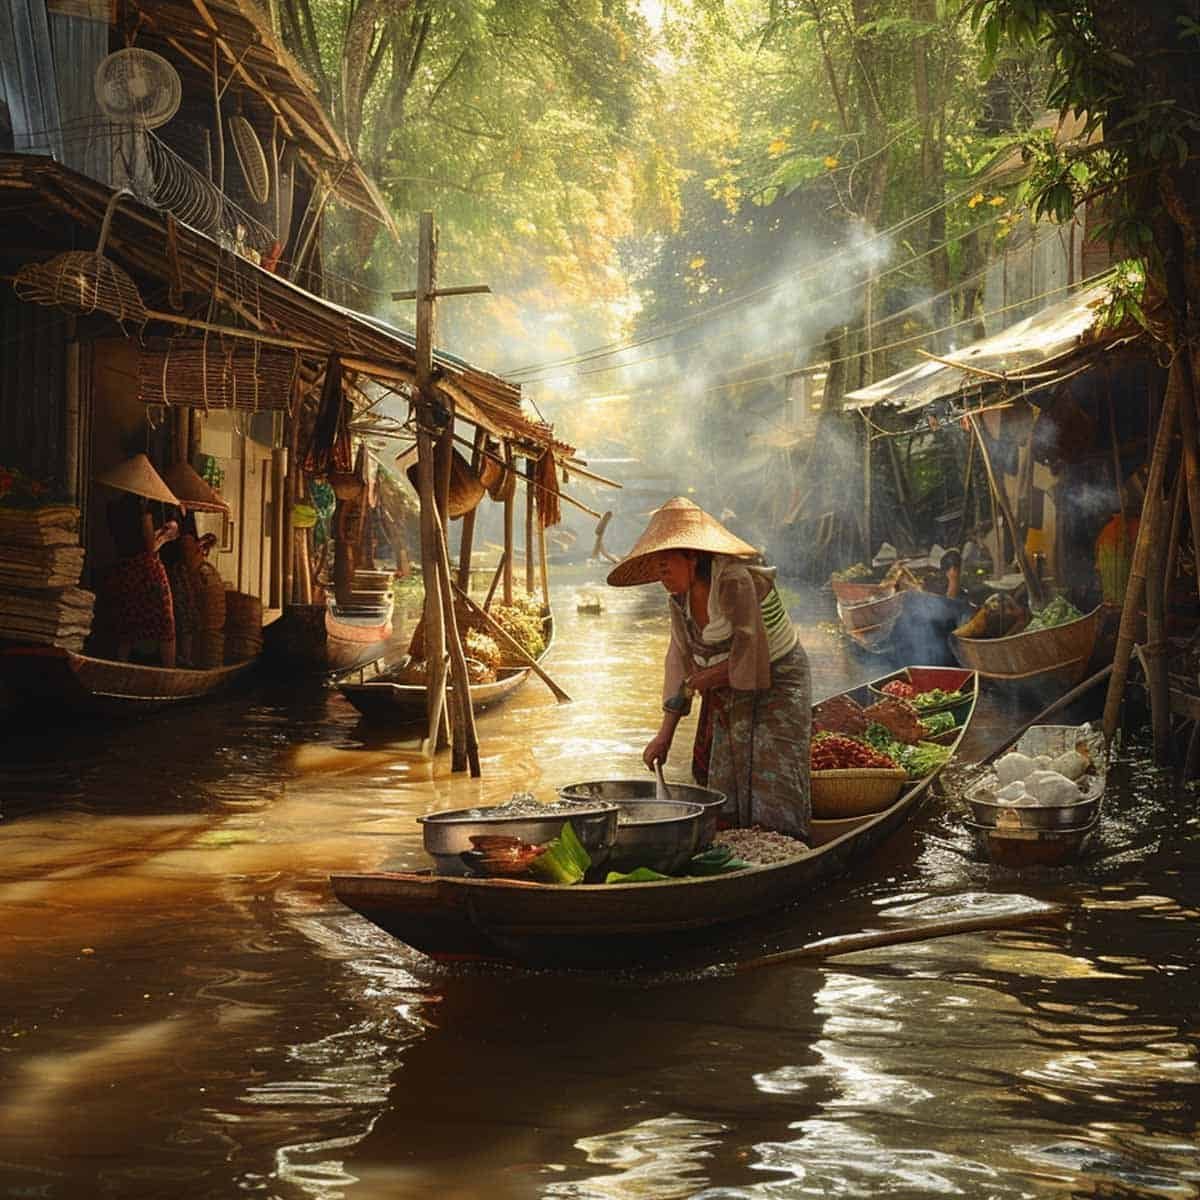 A woman in a traditional Thai boat market serves Thai Boat Noodle Soup(Kuai Tiao Ruea) . She is in a small wooden boat filled with fresh ingredients and cooking utensils, preparing the soup with a pot of simmering broth. The vibrant market scene features other boats, colorful produce, and the bustling atmosphere of shoppers and vendors.